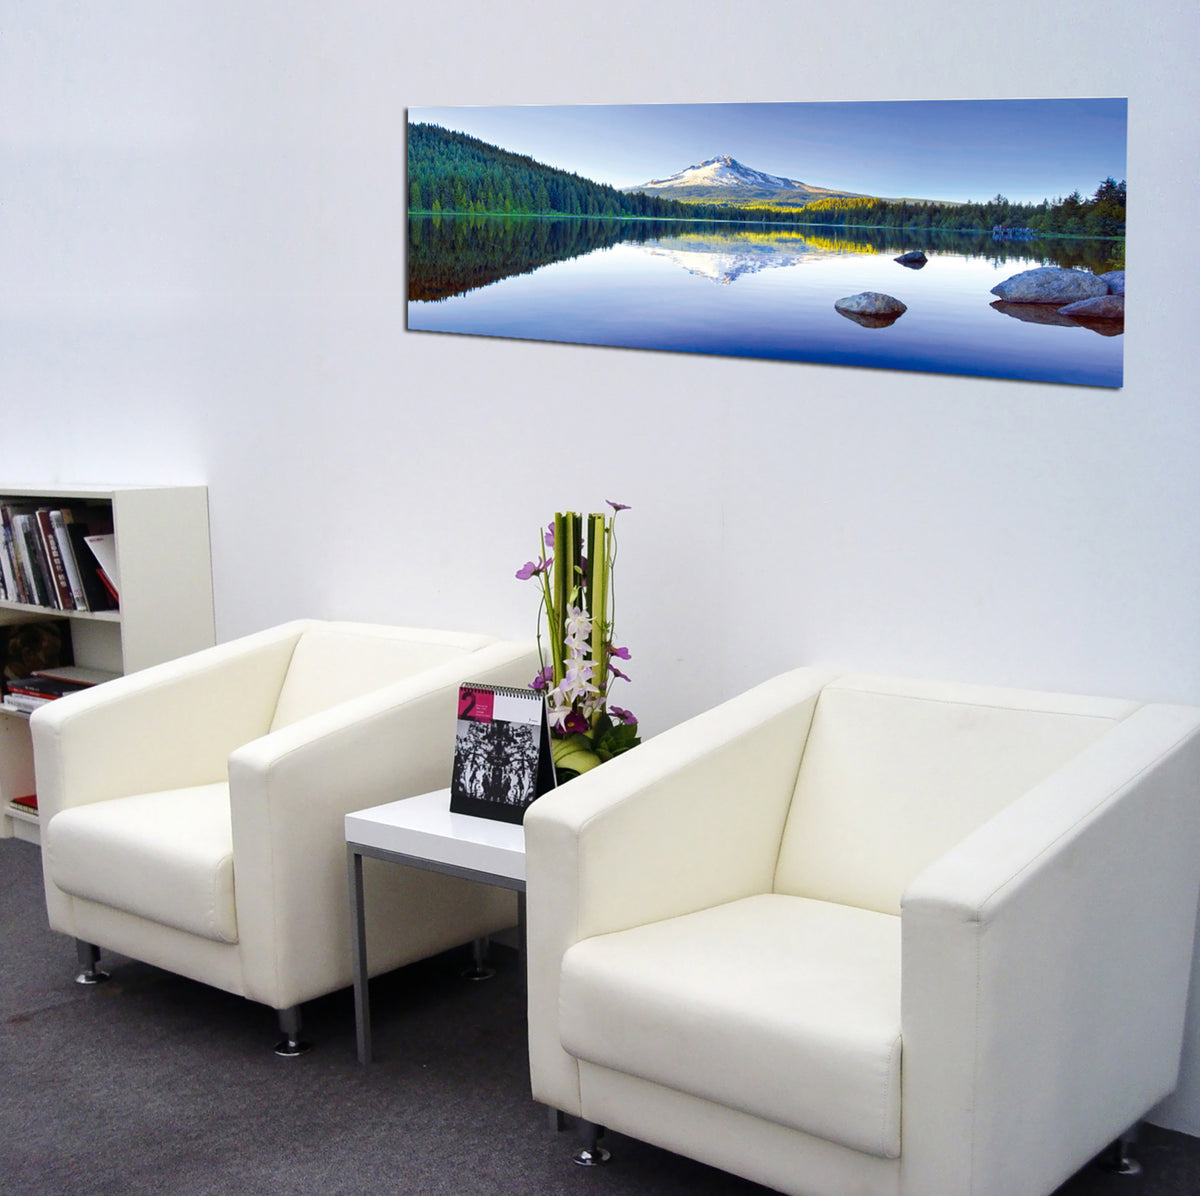 Epic Graffiti &quot;Mountain Reflections&quot; in a High Gloss Acrylic Wall Art, 60&quot; x 20&quot;